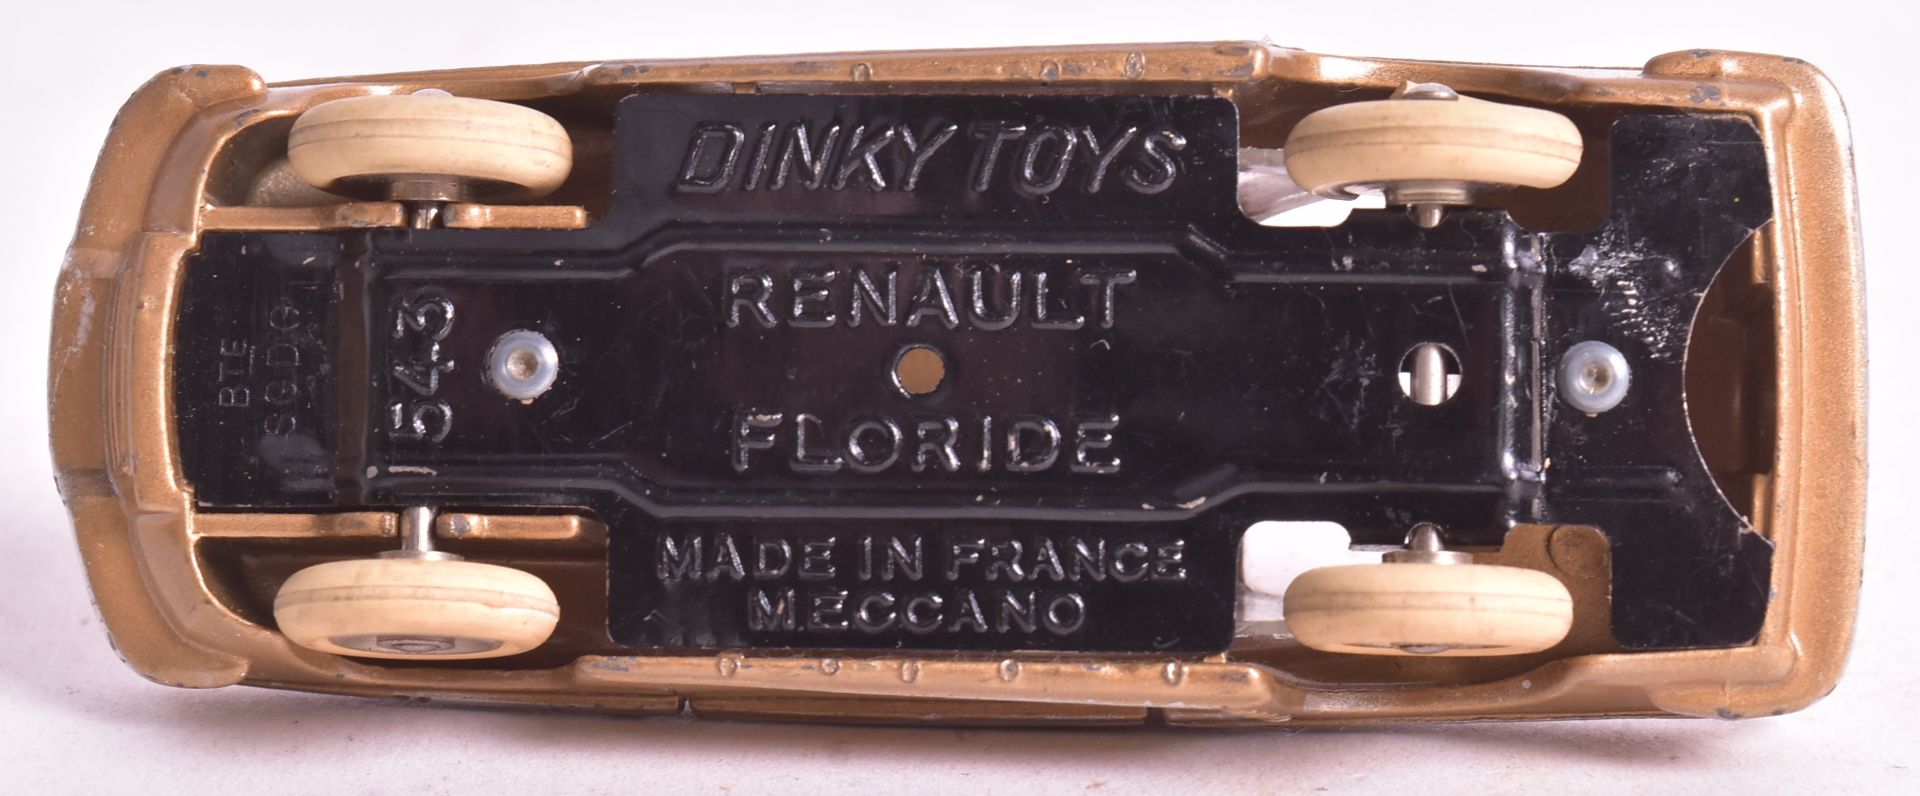 DIECAST - FRENCH DINKY TOYS - RENAULT FLORIDE - Image 4 of 4